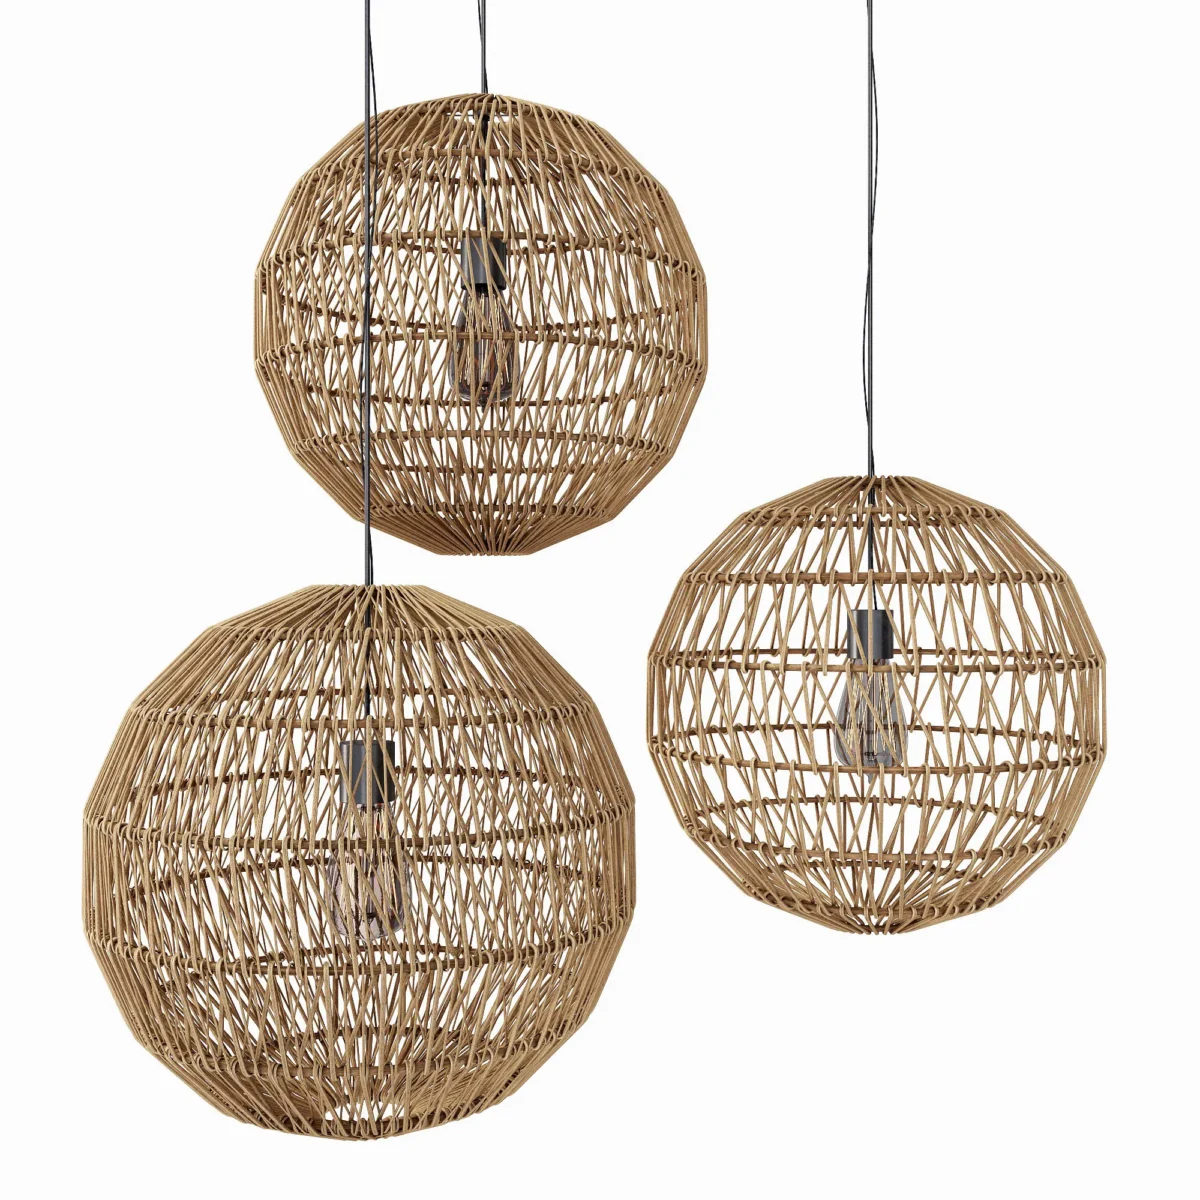 Lamp wood rotang wicker Sphere 3D model download on cg.market 3ds max Corona Render V-Ray